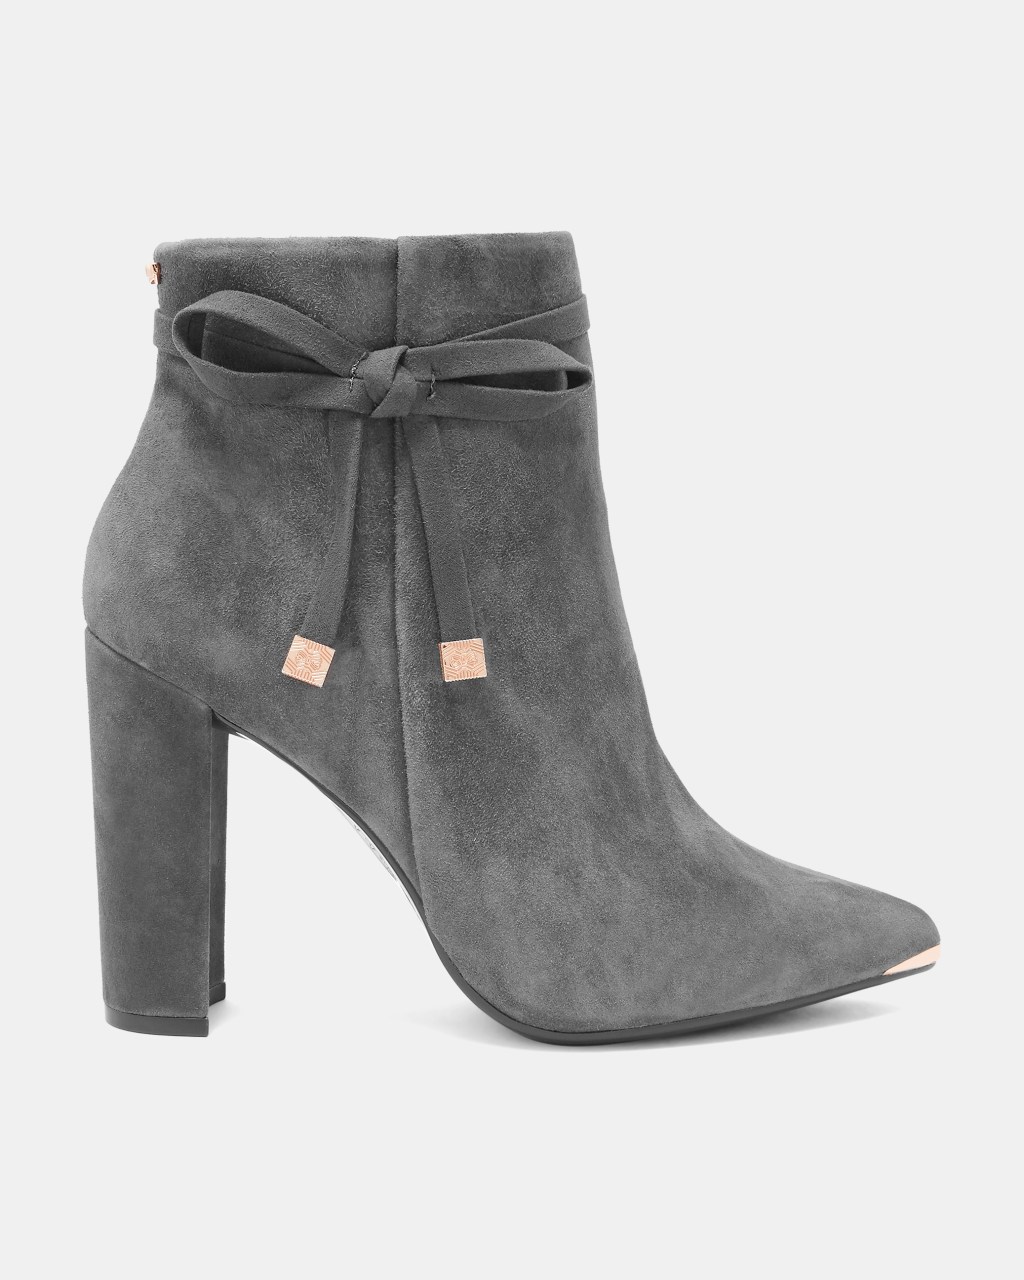 Suede bow detail ankle boots - Charcoal 